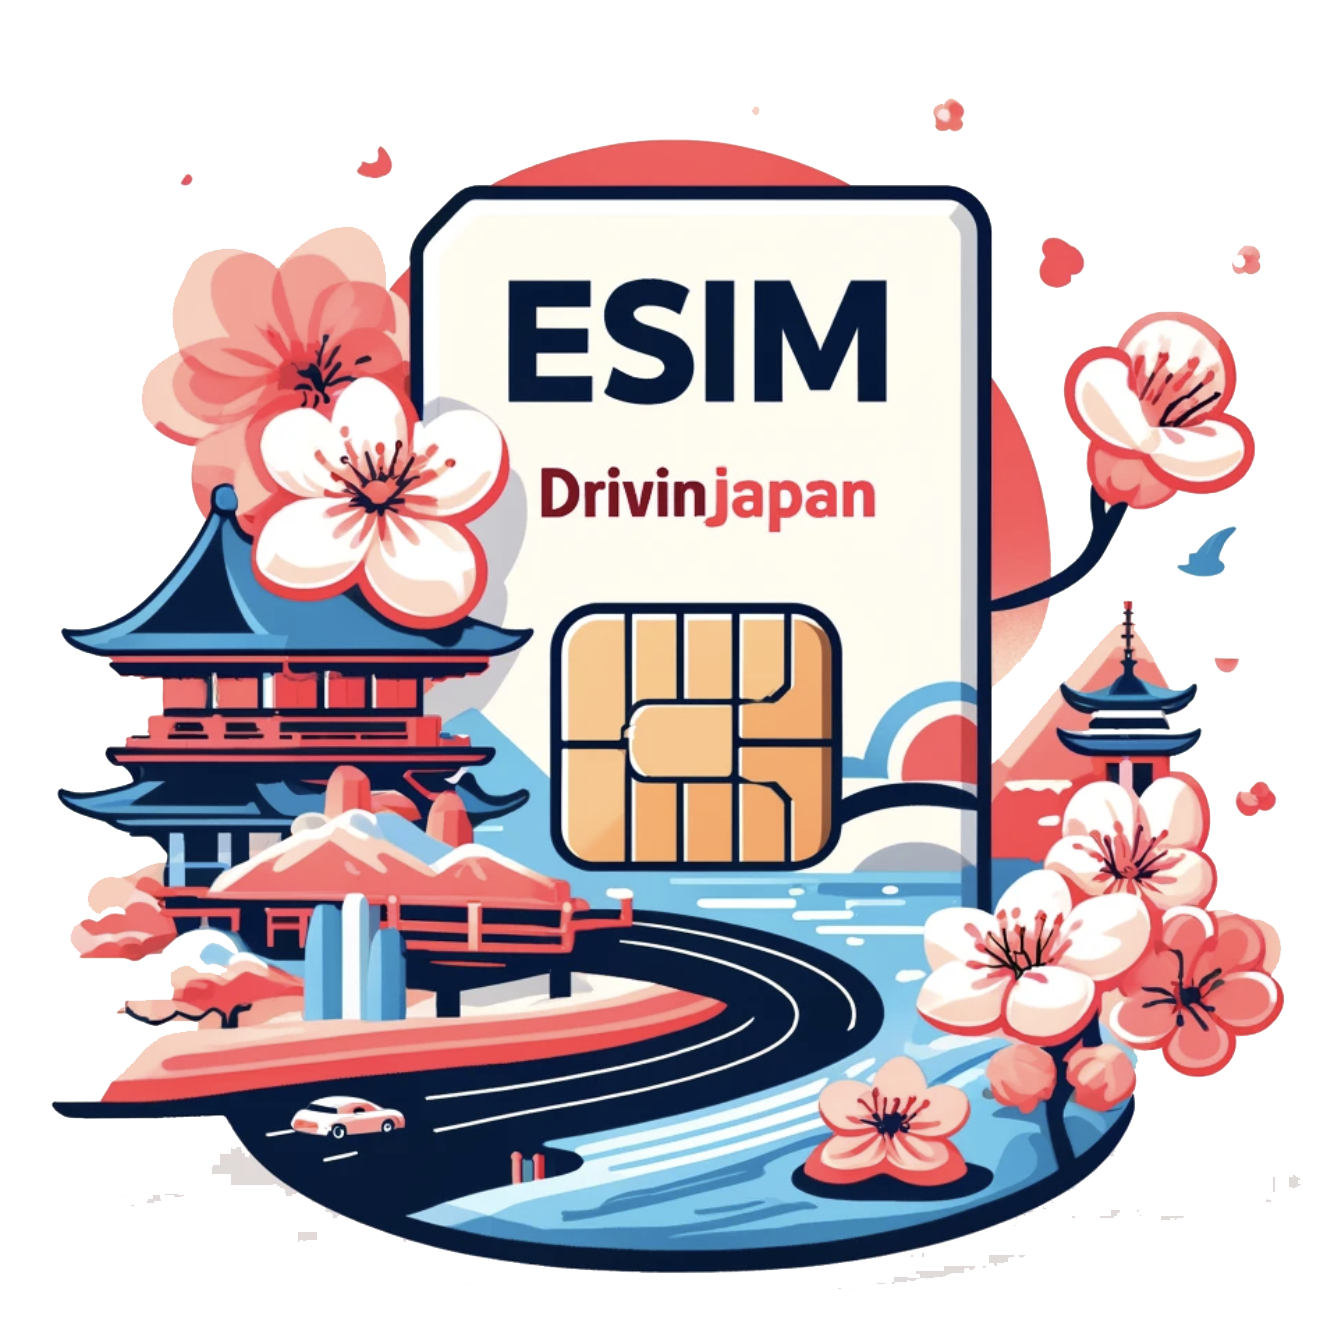 Get your eSIM card with Drivinjapan.com - Get your translation  to drive in Japan